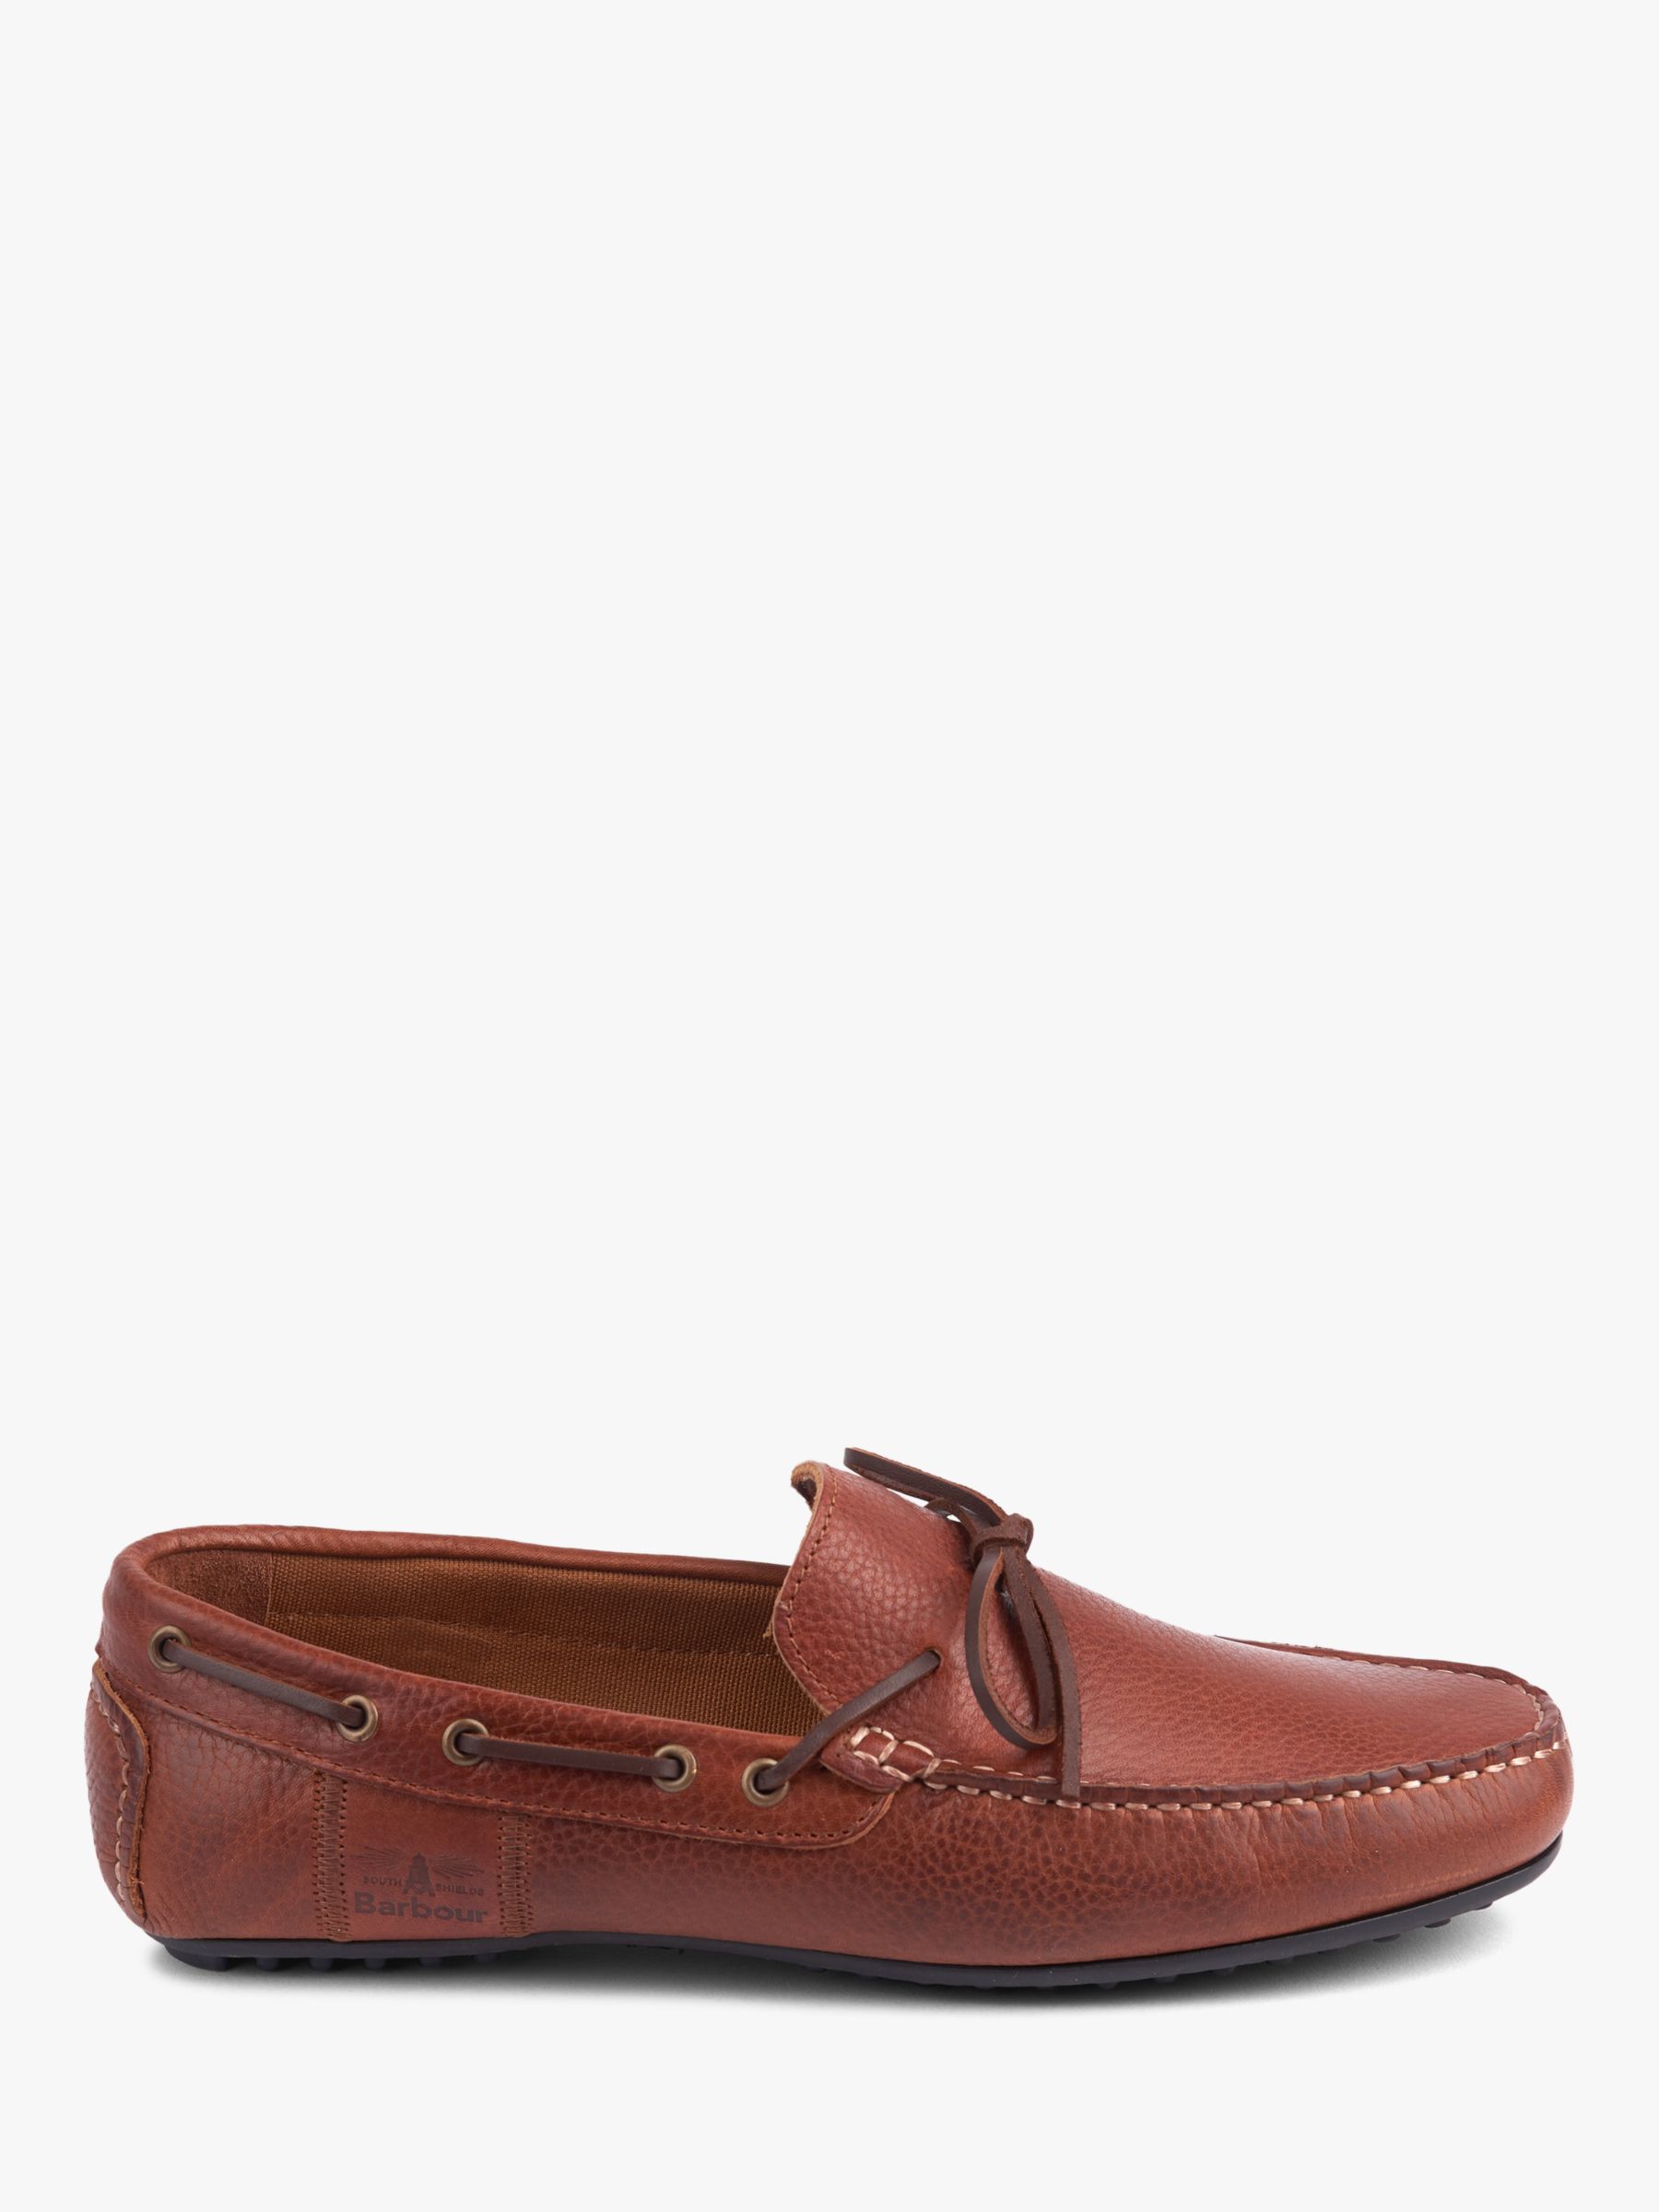 Barbour Eldon Leather Penny Driver Loafers, Tan at John Lewis & Partners